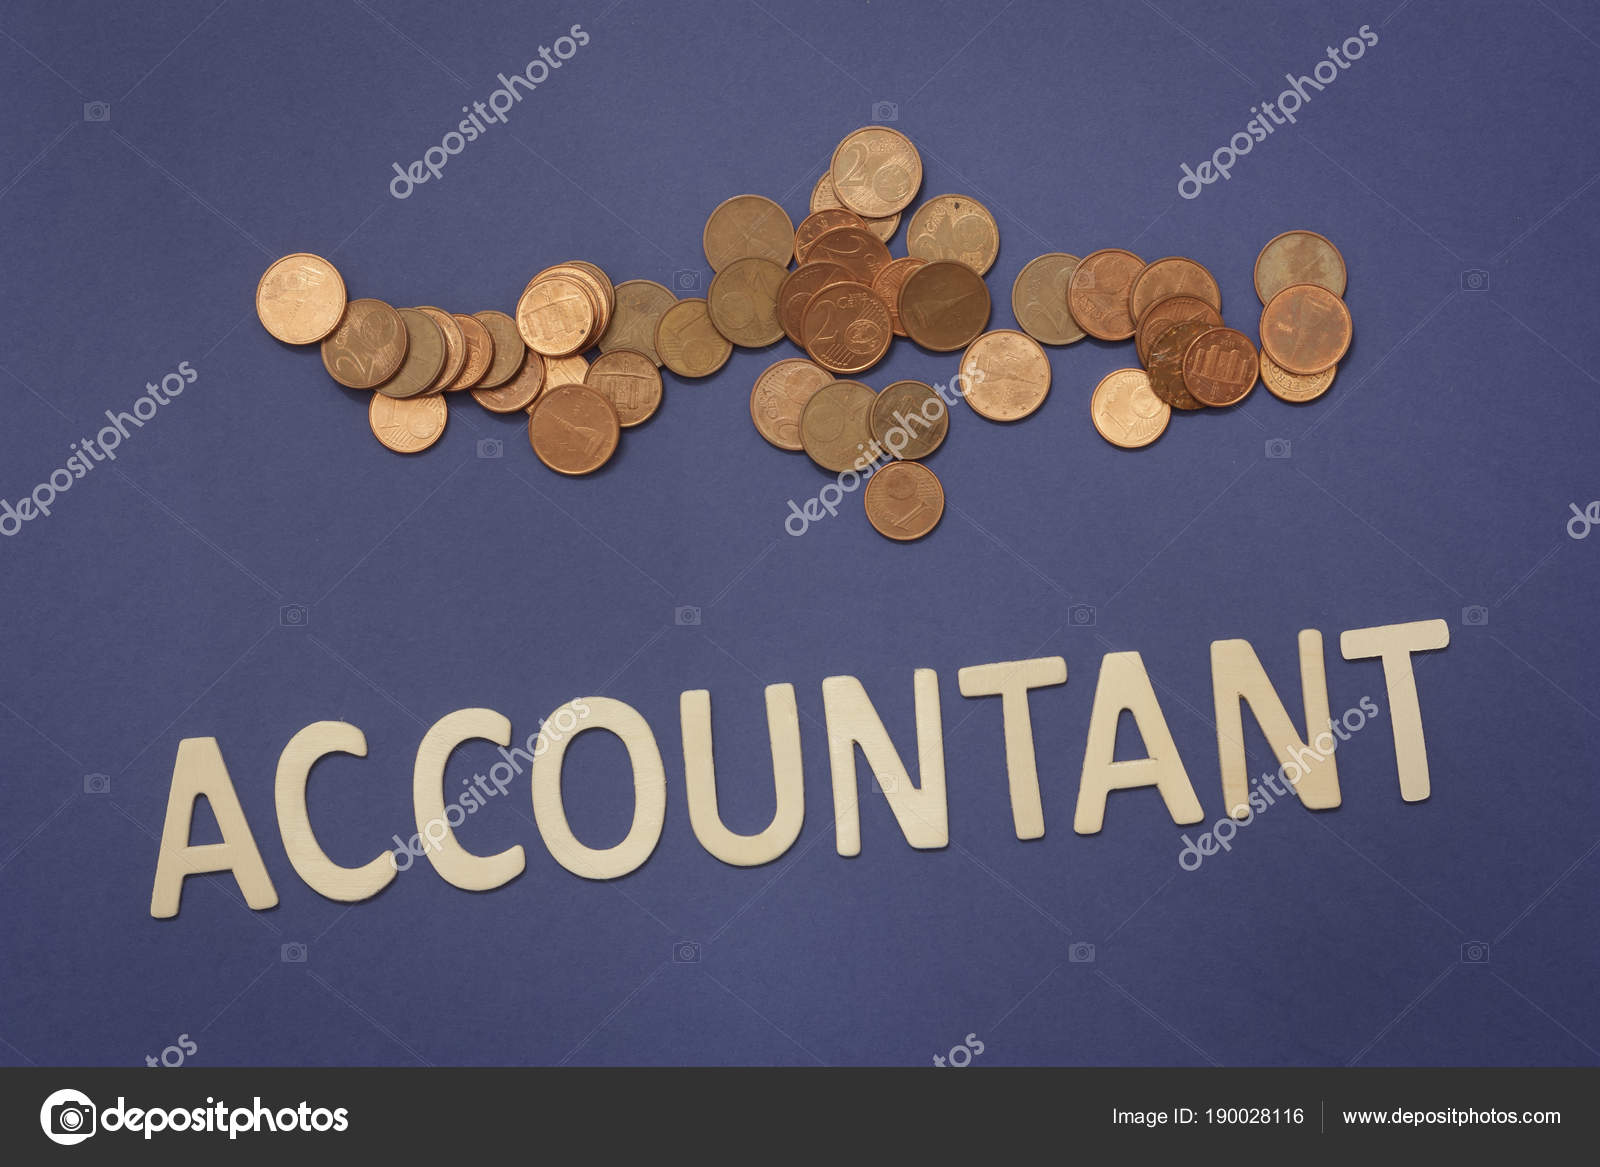 Image result for accountant written